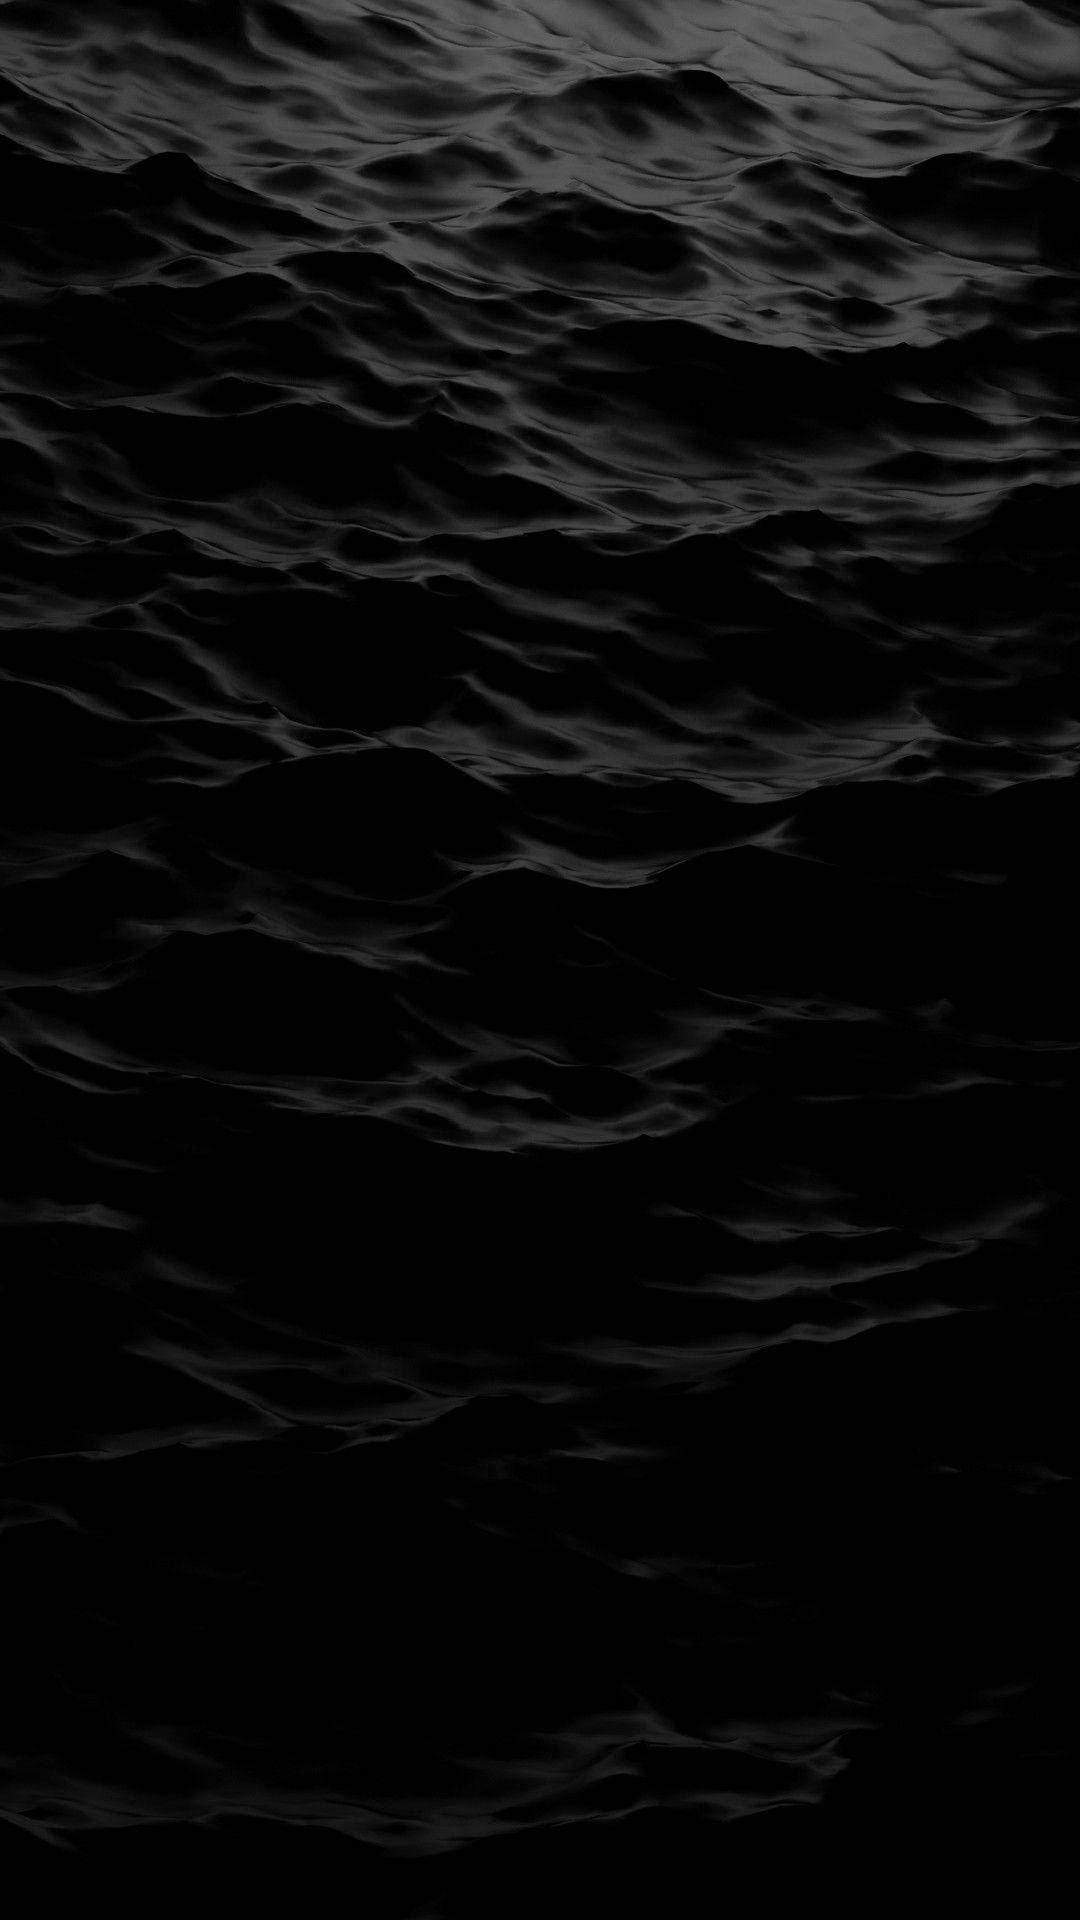 Aesthetic Pure Black Waves Of Water Wallpaper